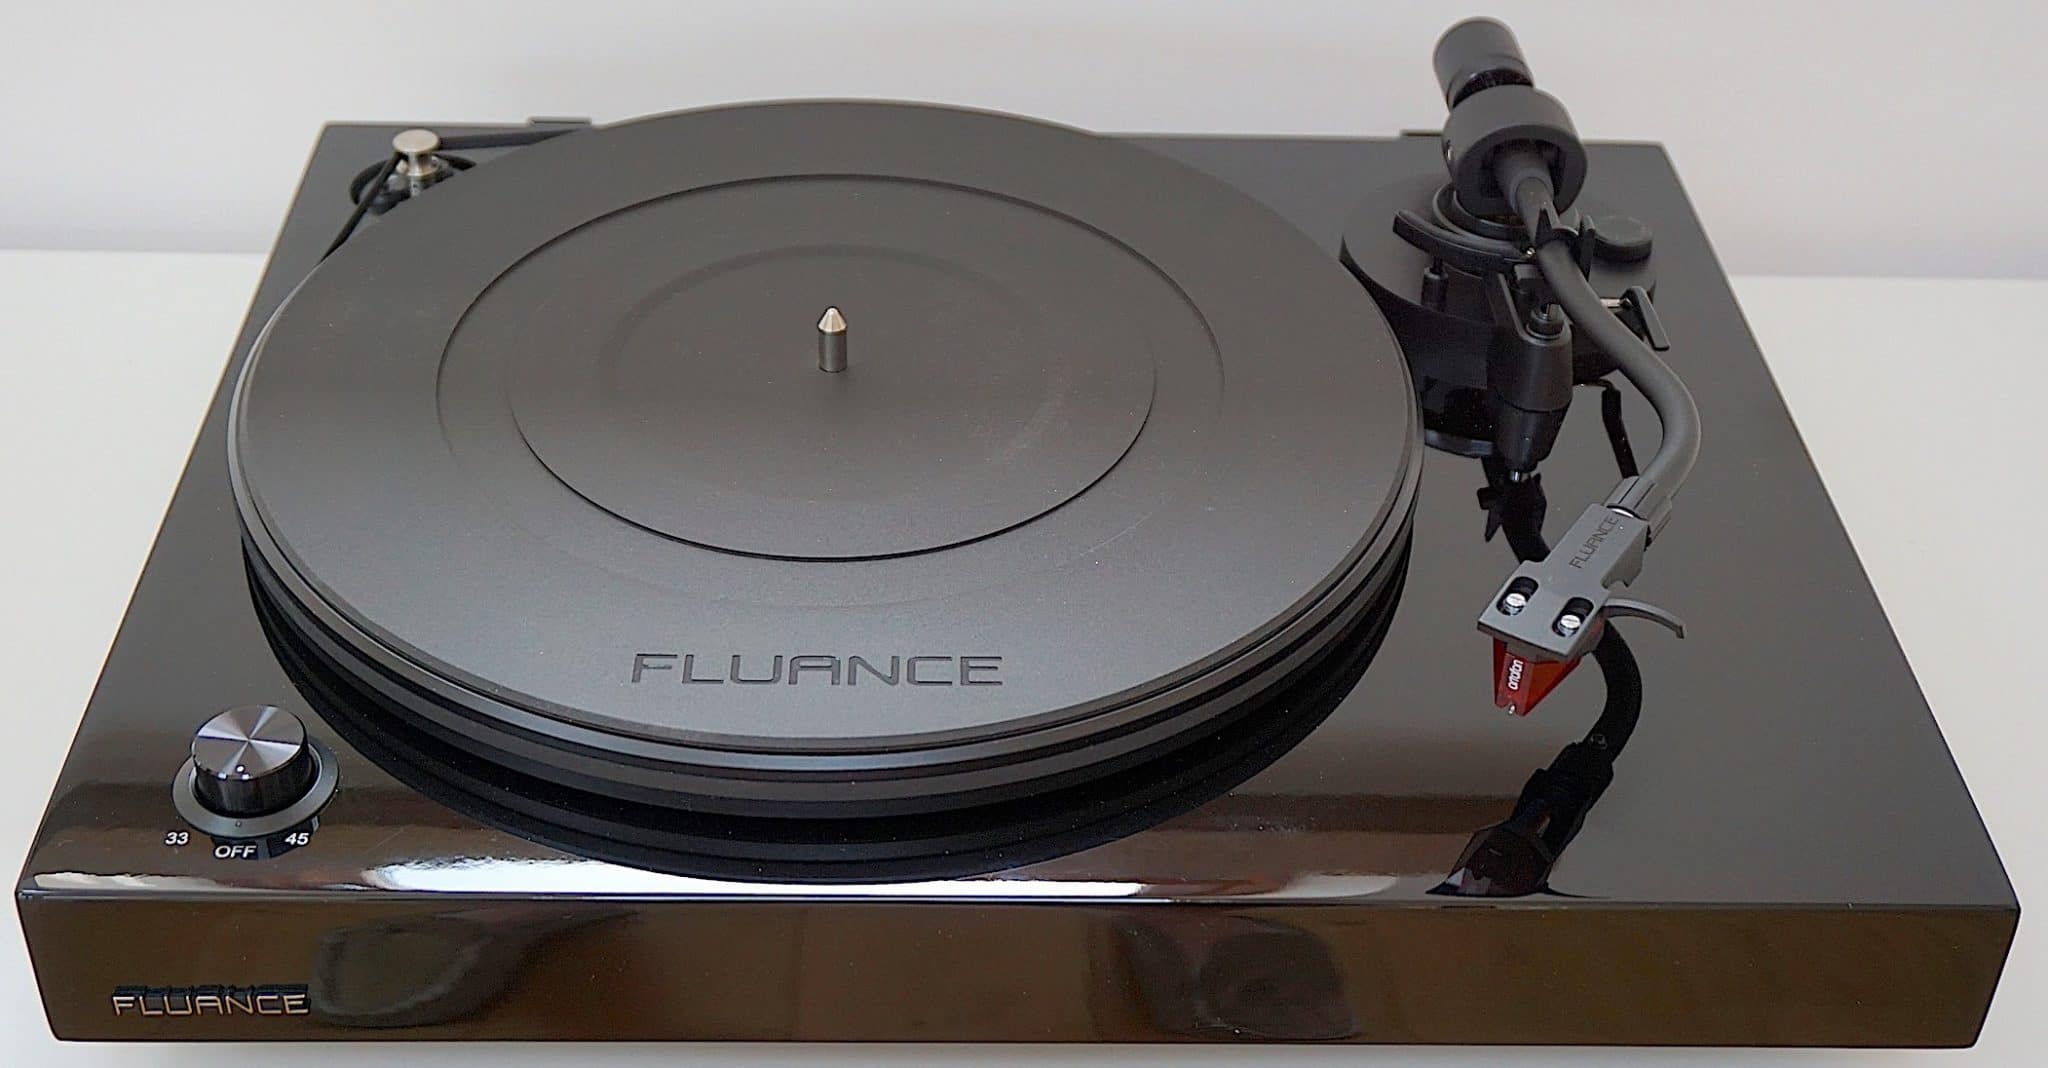 RT83 Turntable From Fluance on YouTube